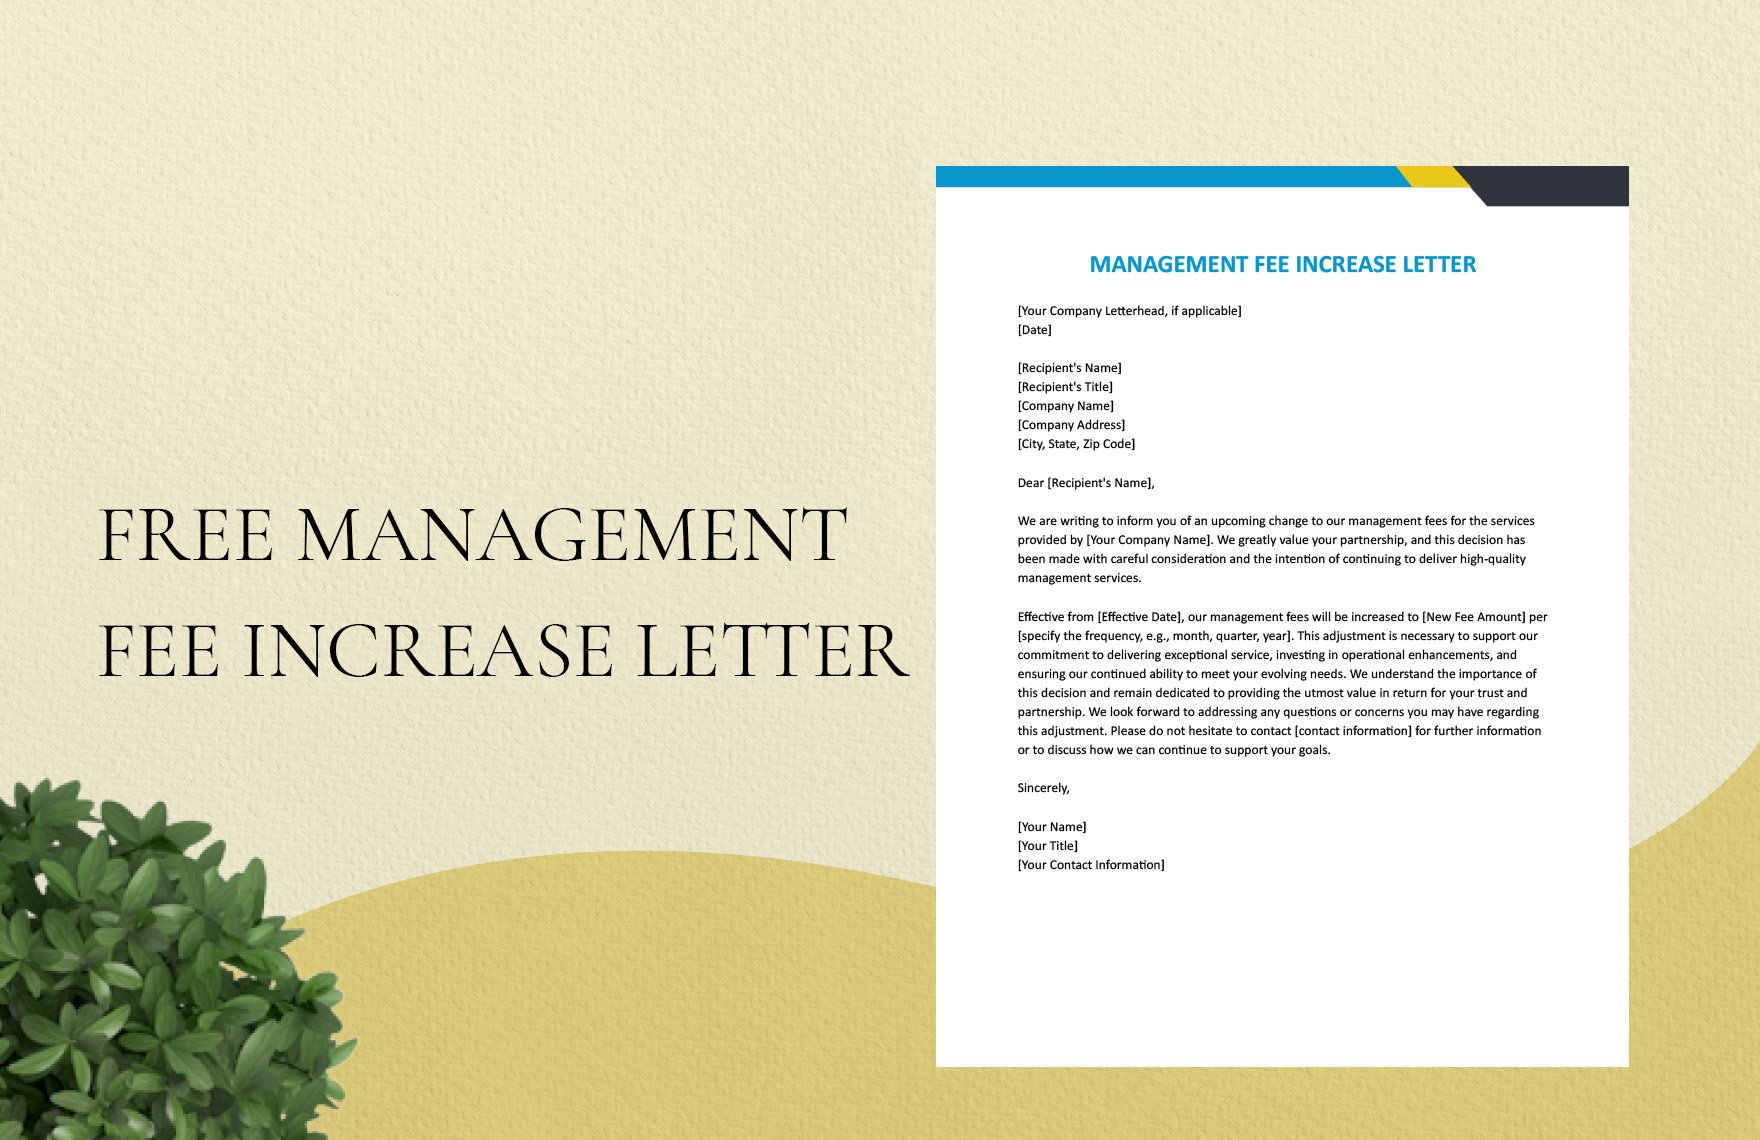 Management Fee Increase Letter in Word, Google Docs